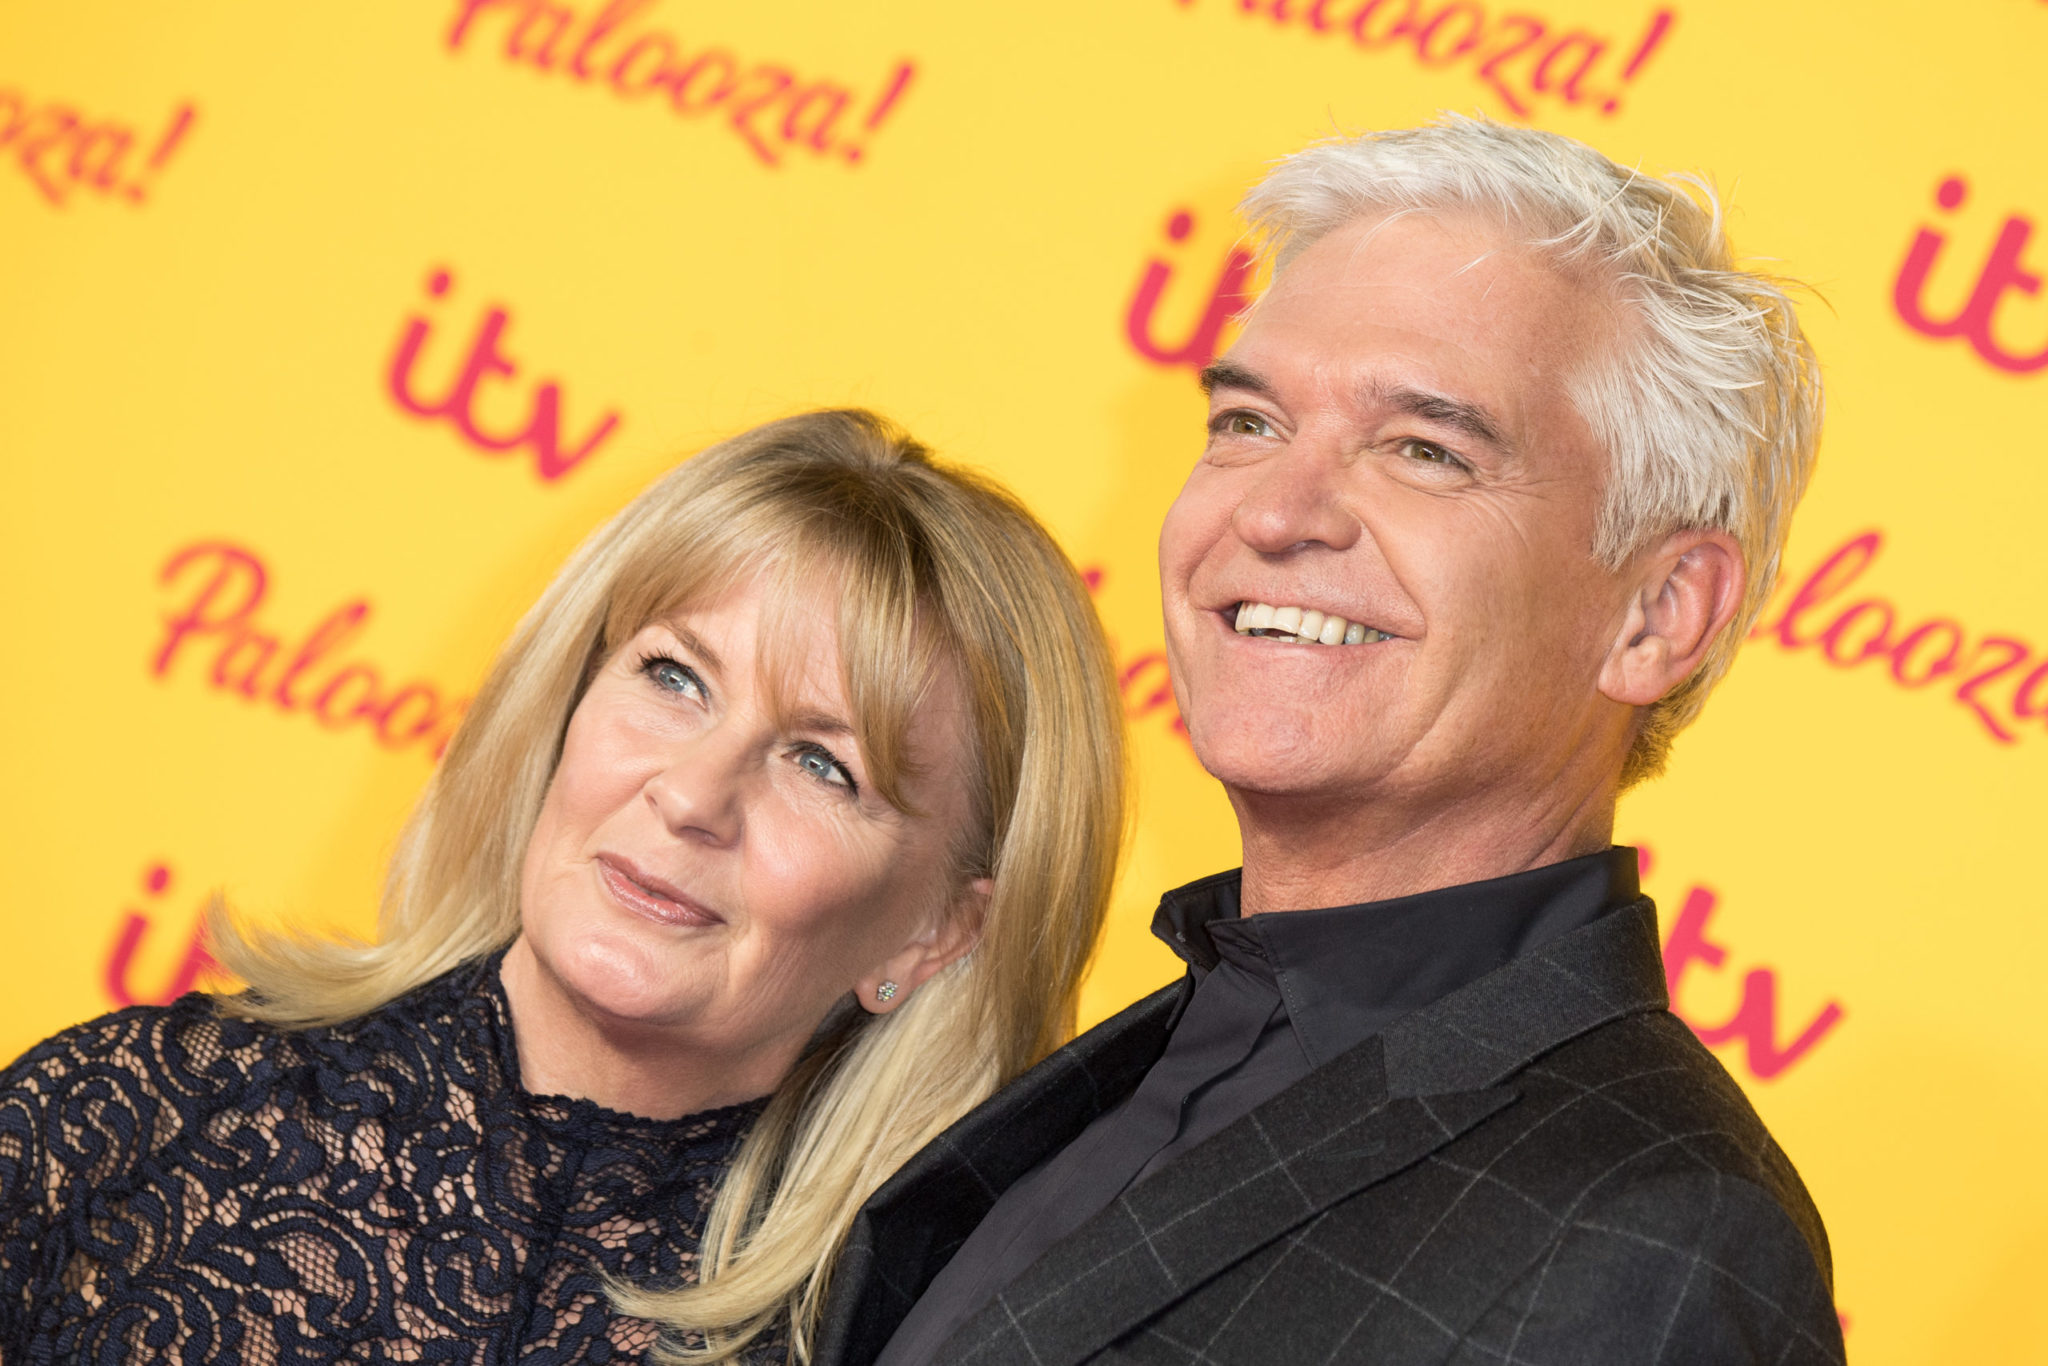 Phillip Schofield and wife of 27 years Stephanie Lowe 